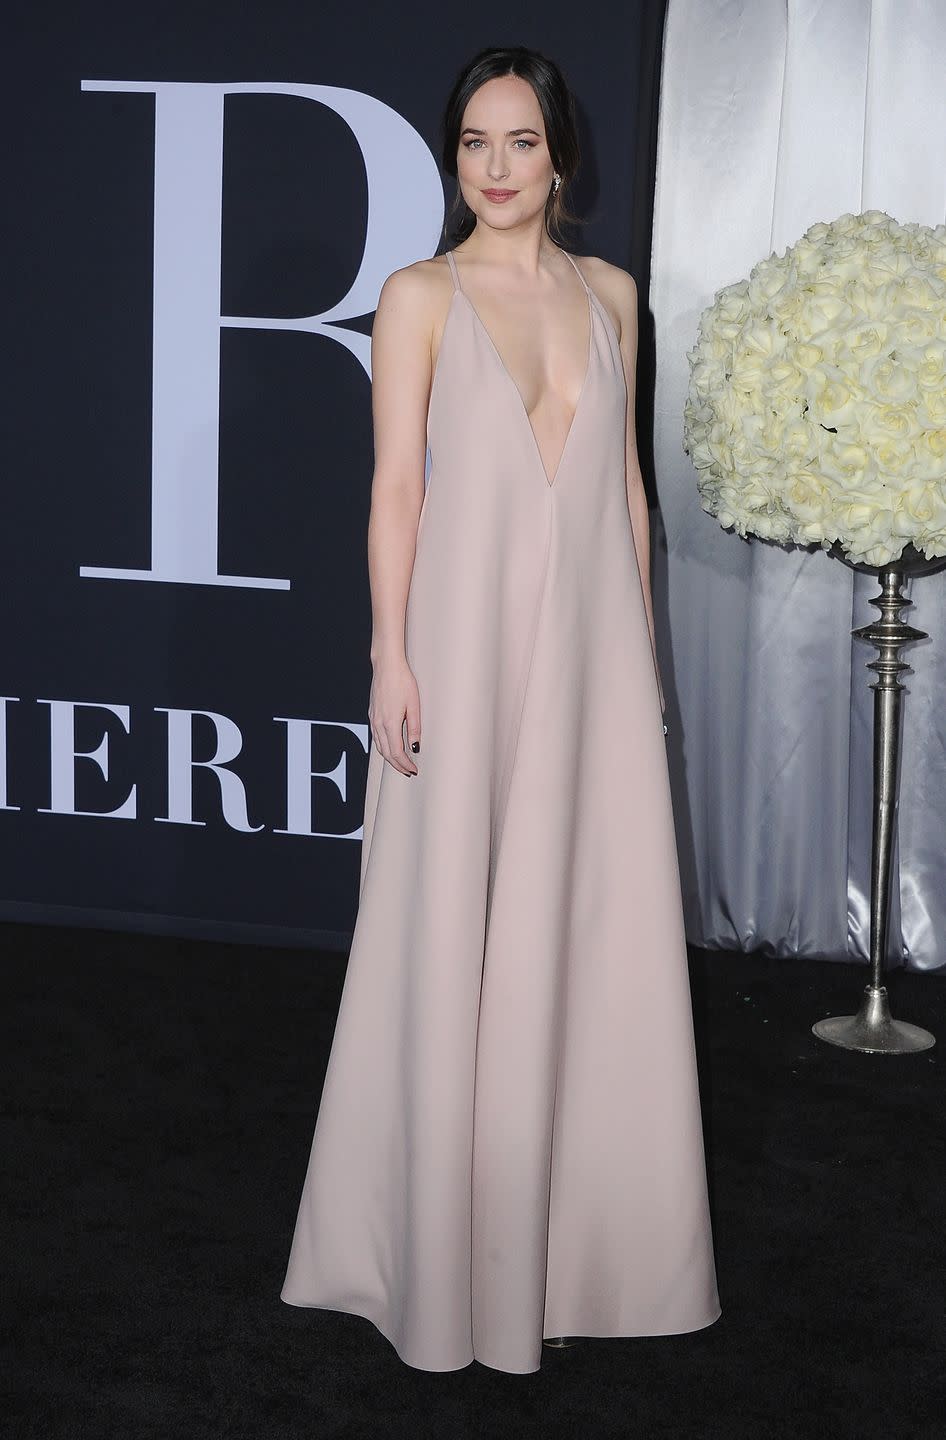 Dakota Johnson Wore a Super Low-Cut Nude Dress That Made Everyone Stop and Stare - Yahoo Life